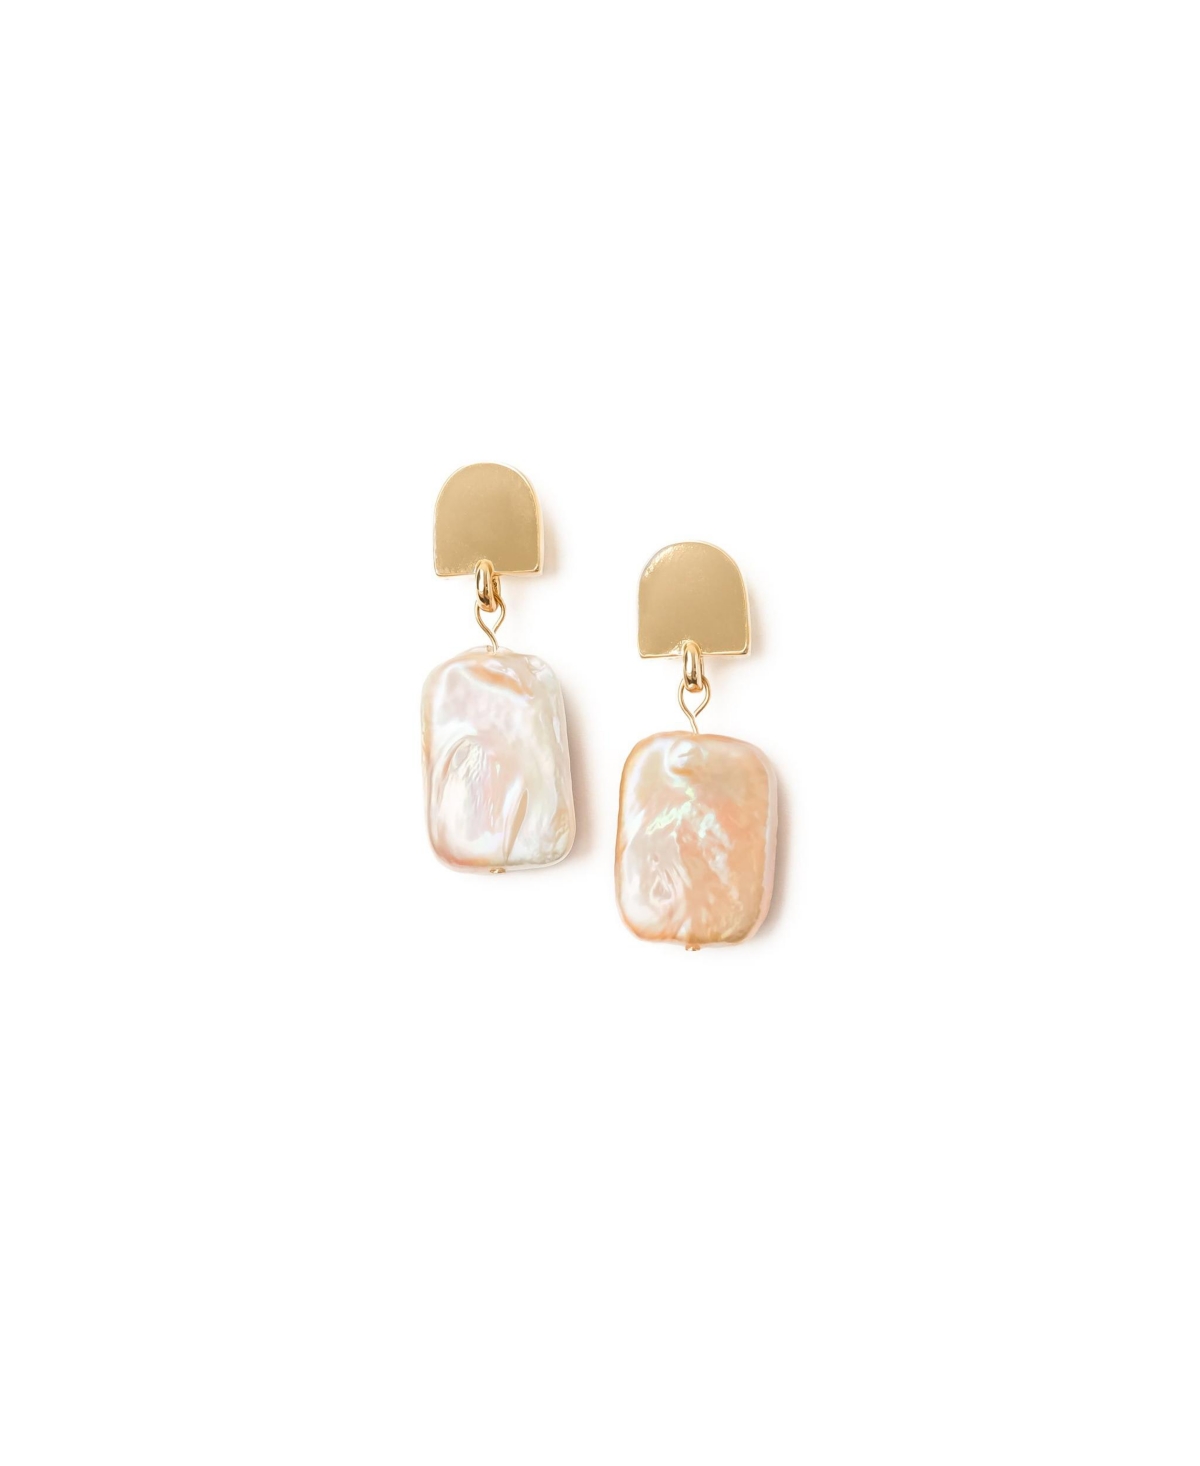 Dome + Peachy Pearl Earrings - Light Pastel Pink